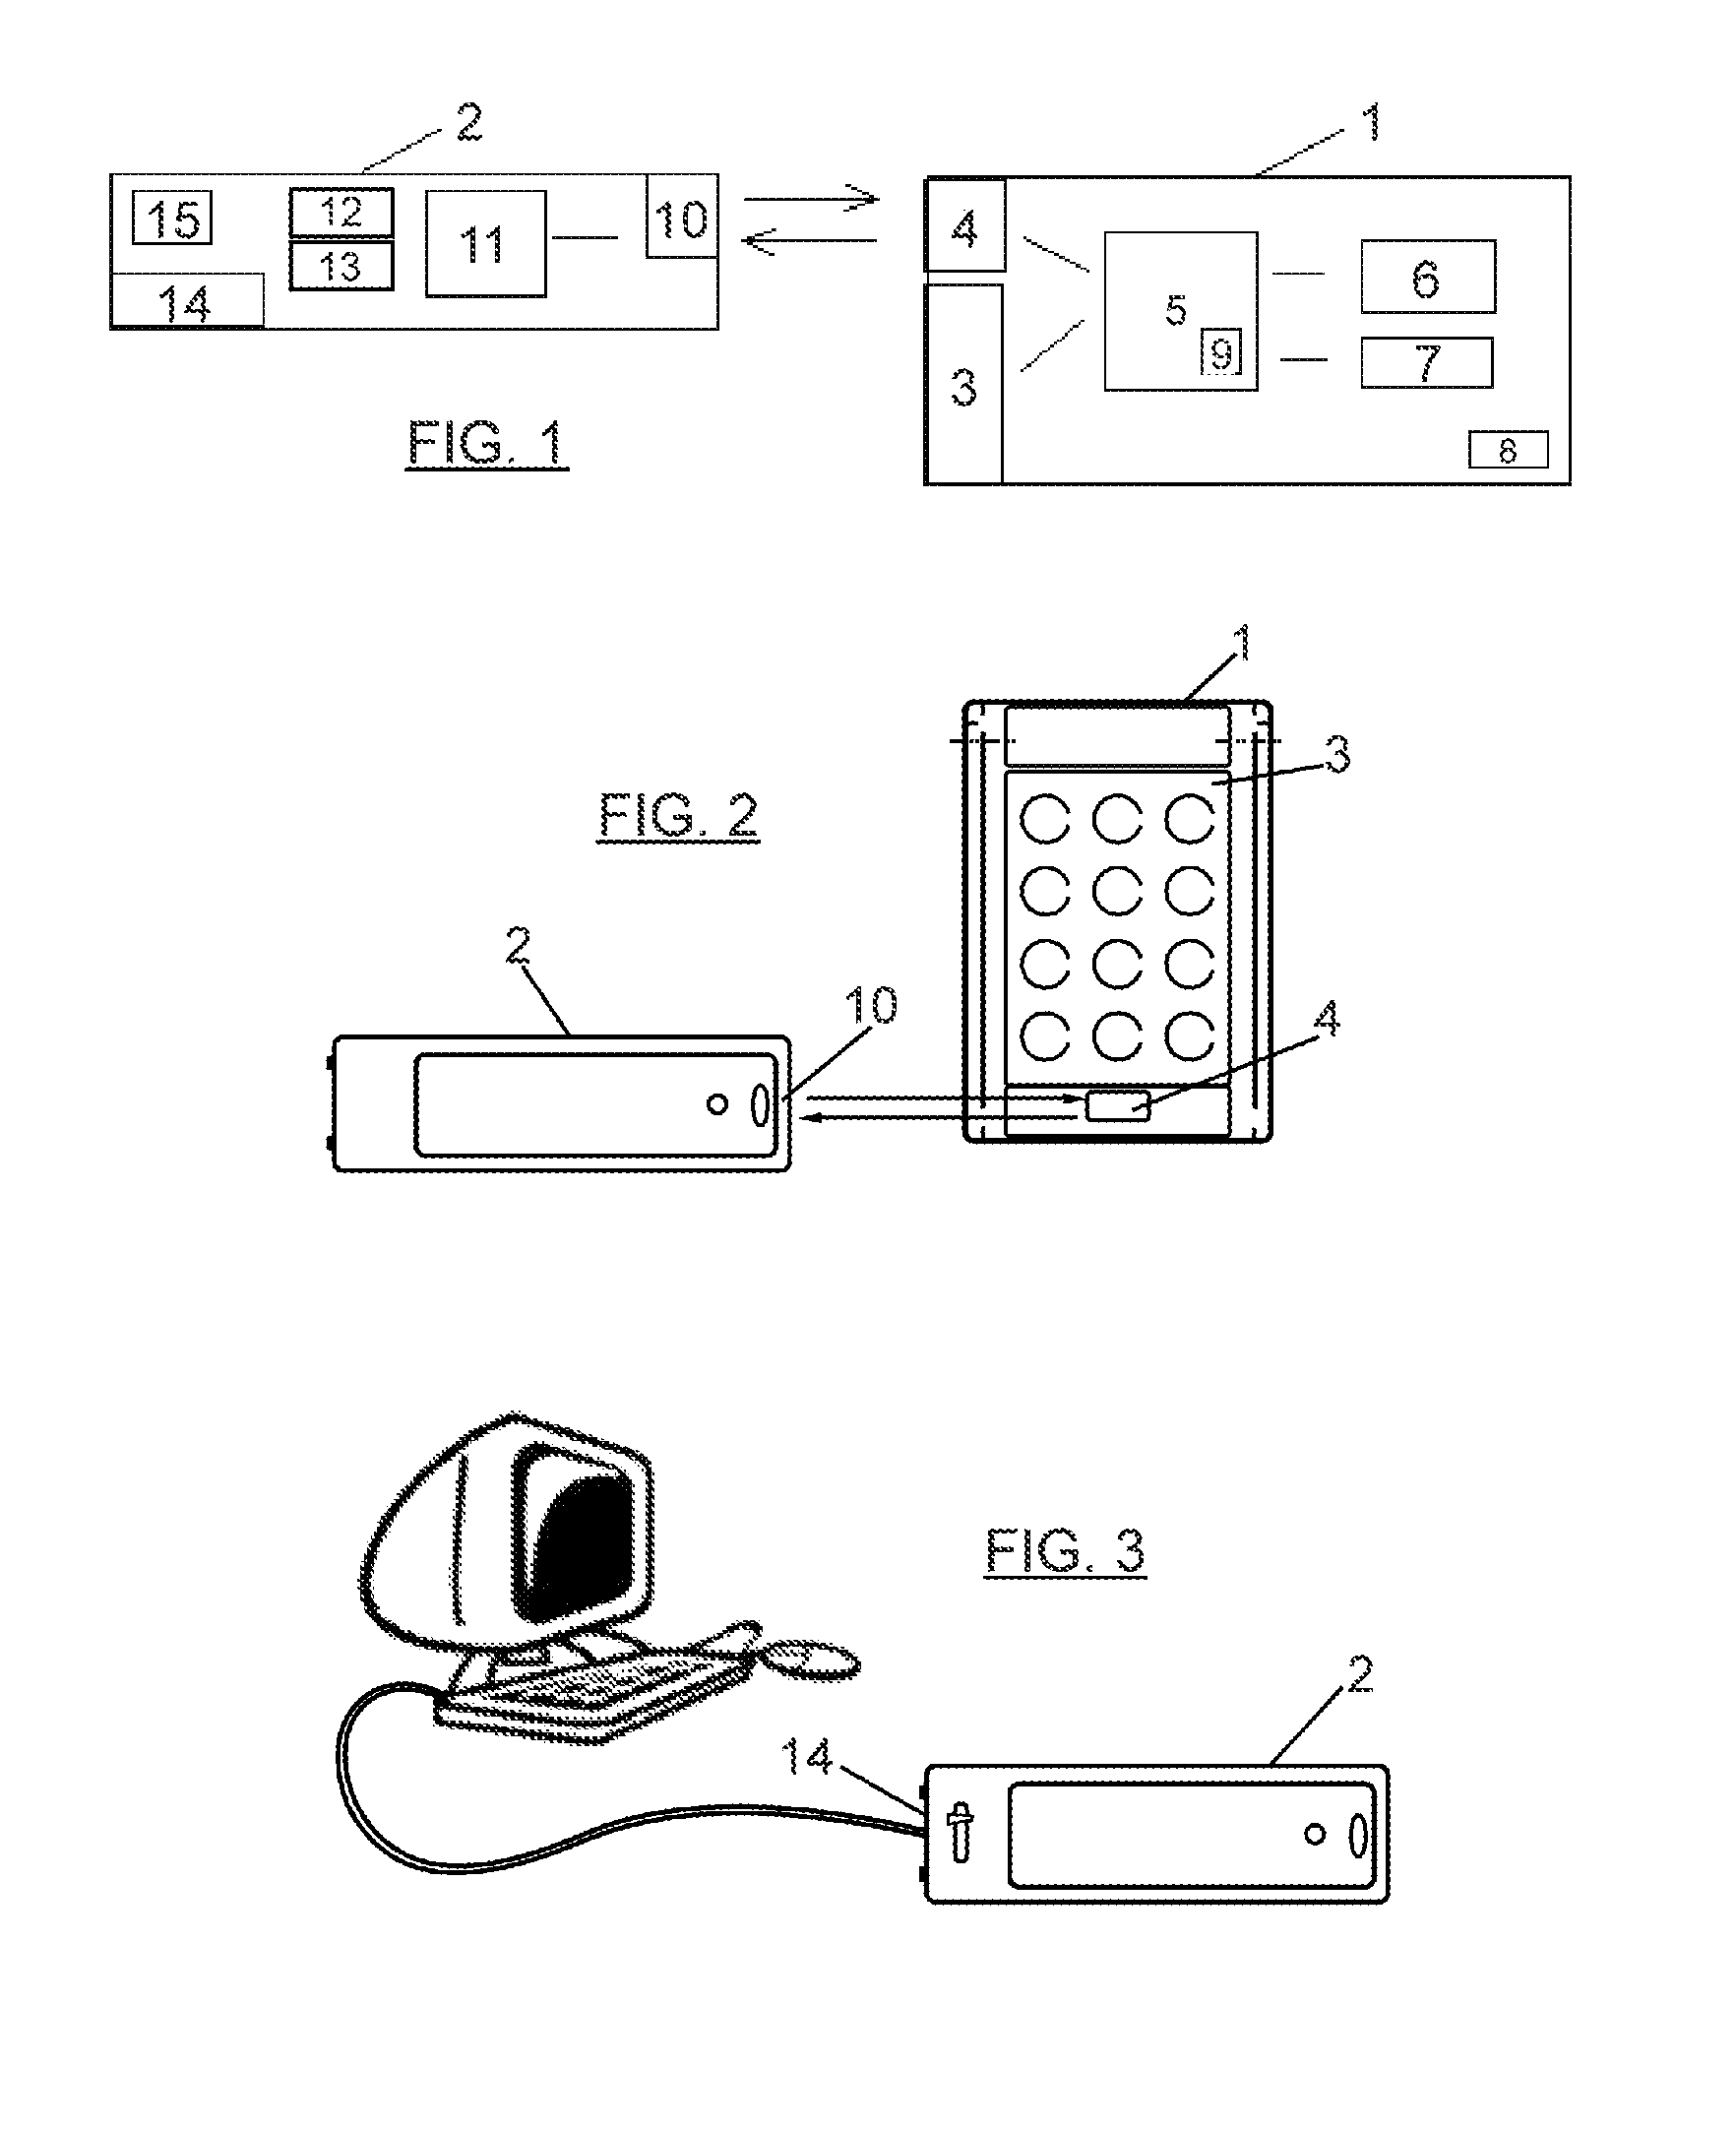 Locking system with infrared communications